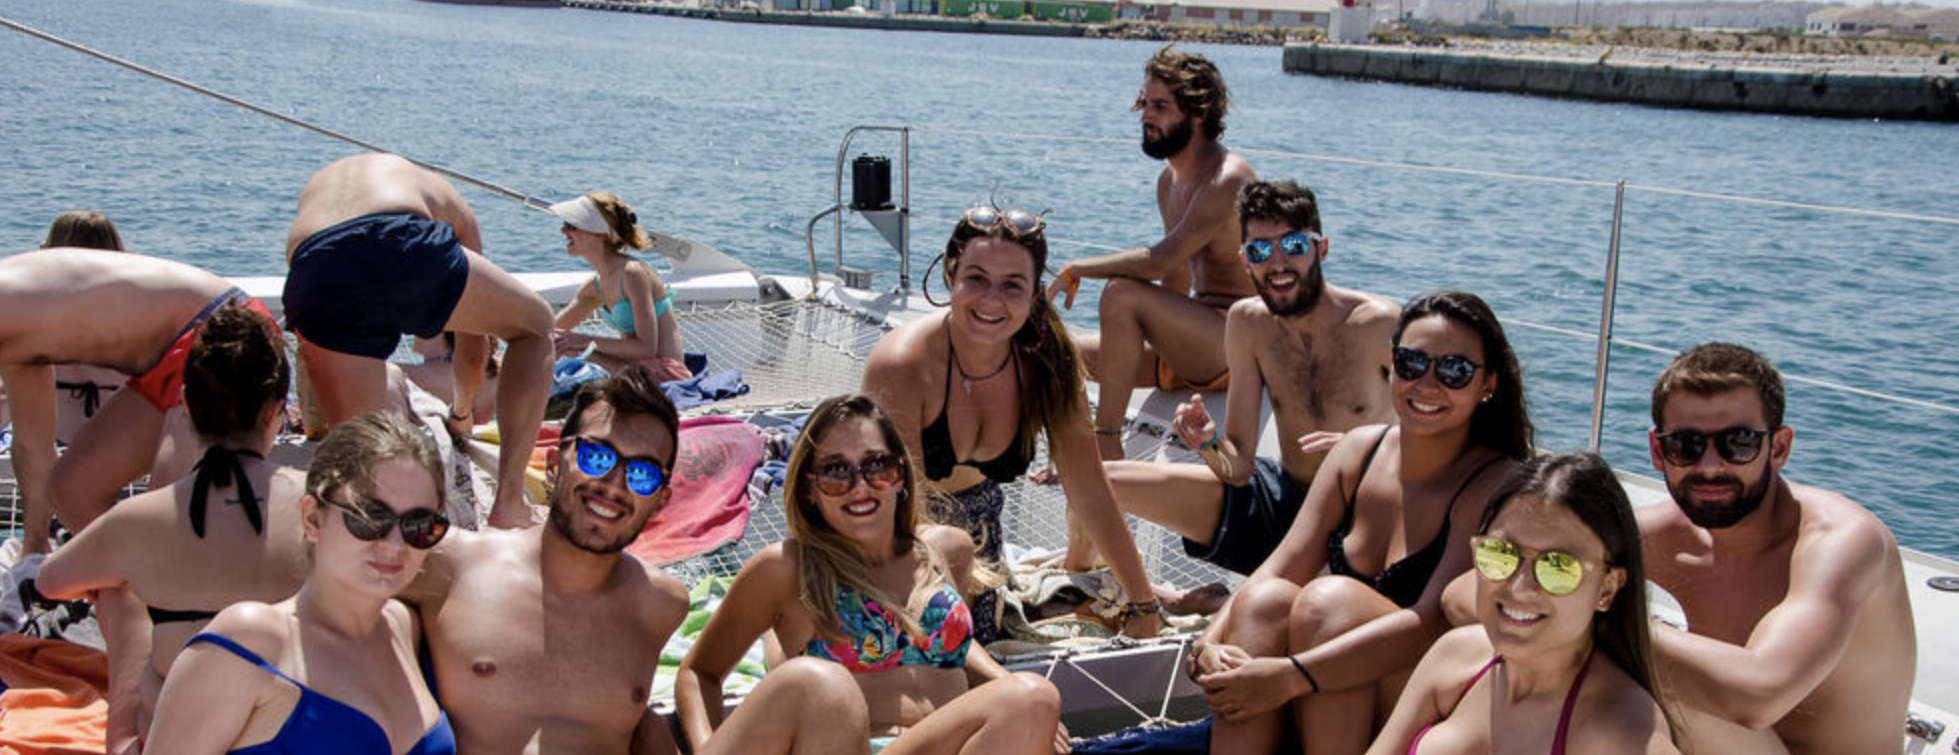 Alicante Party on a boat